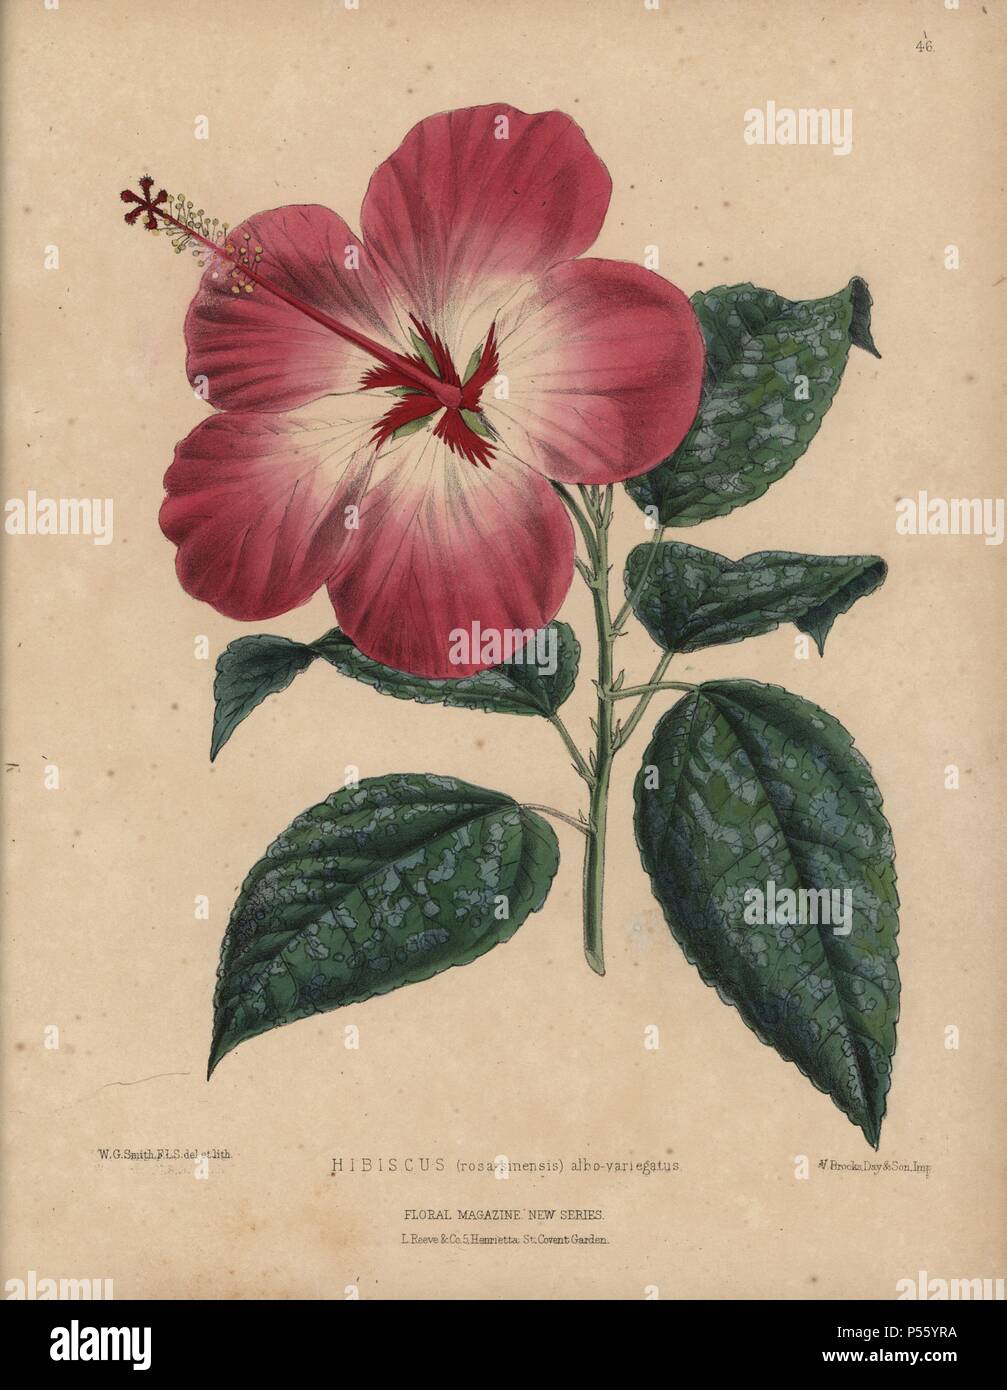 Pink and white hibiscus with variegated leaves. Hibiscus rosa sinensis albo-variegatus. Handcolored botanical drawn and lithographed by W.G. Smith from H.H. Dombrain's 'Floral Magazine' 1872.. Worthington G. Smith (1835-1917), architect, engraver and mycologist. Smith also illustrated 'The Gardener's Chronicle.' Henry Honywood Dombrain (1818-1905), clergyman gardener, was editor of the 'Floral Magazine' from 1862 to 1873. Stock Photo